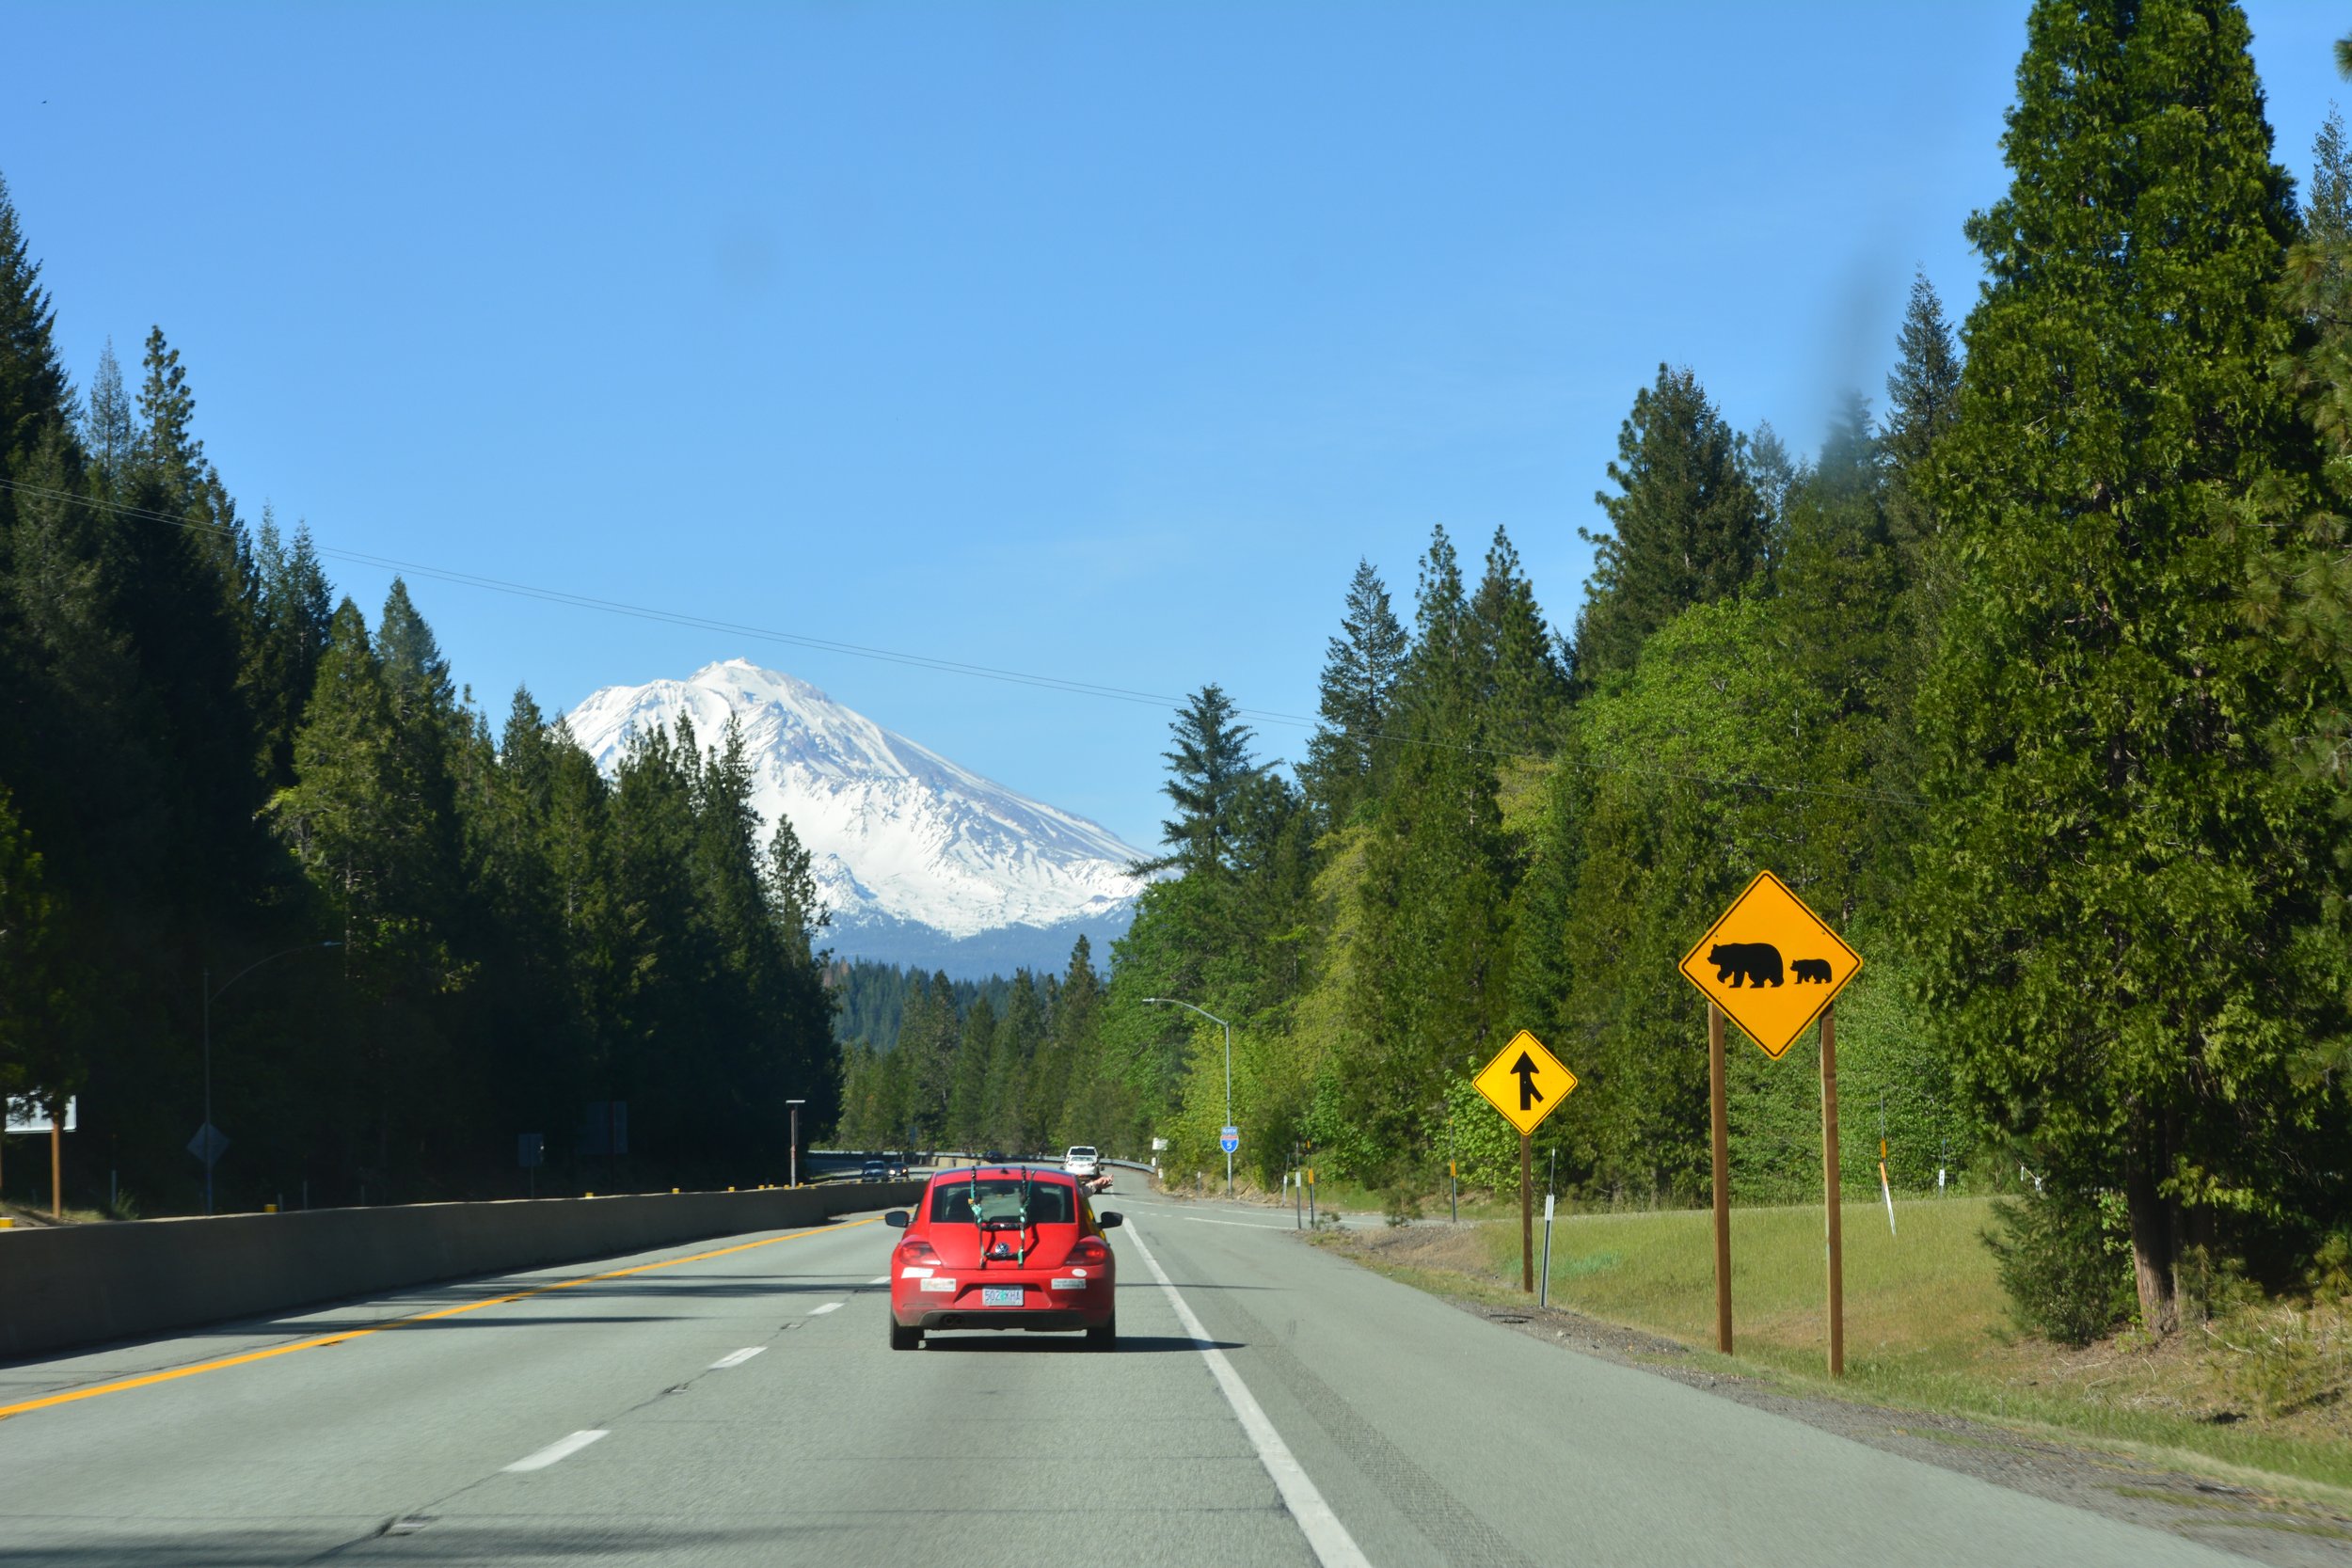  Mount Shasta looms large over significant stretches of I-5 in Northern California. 